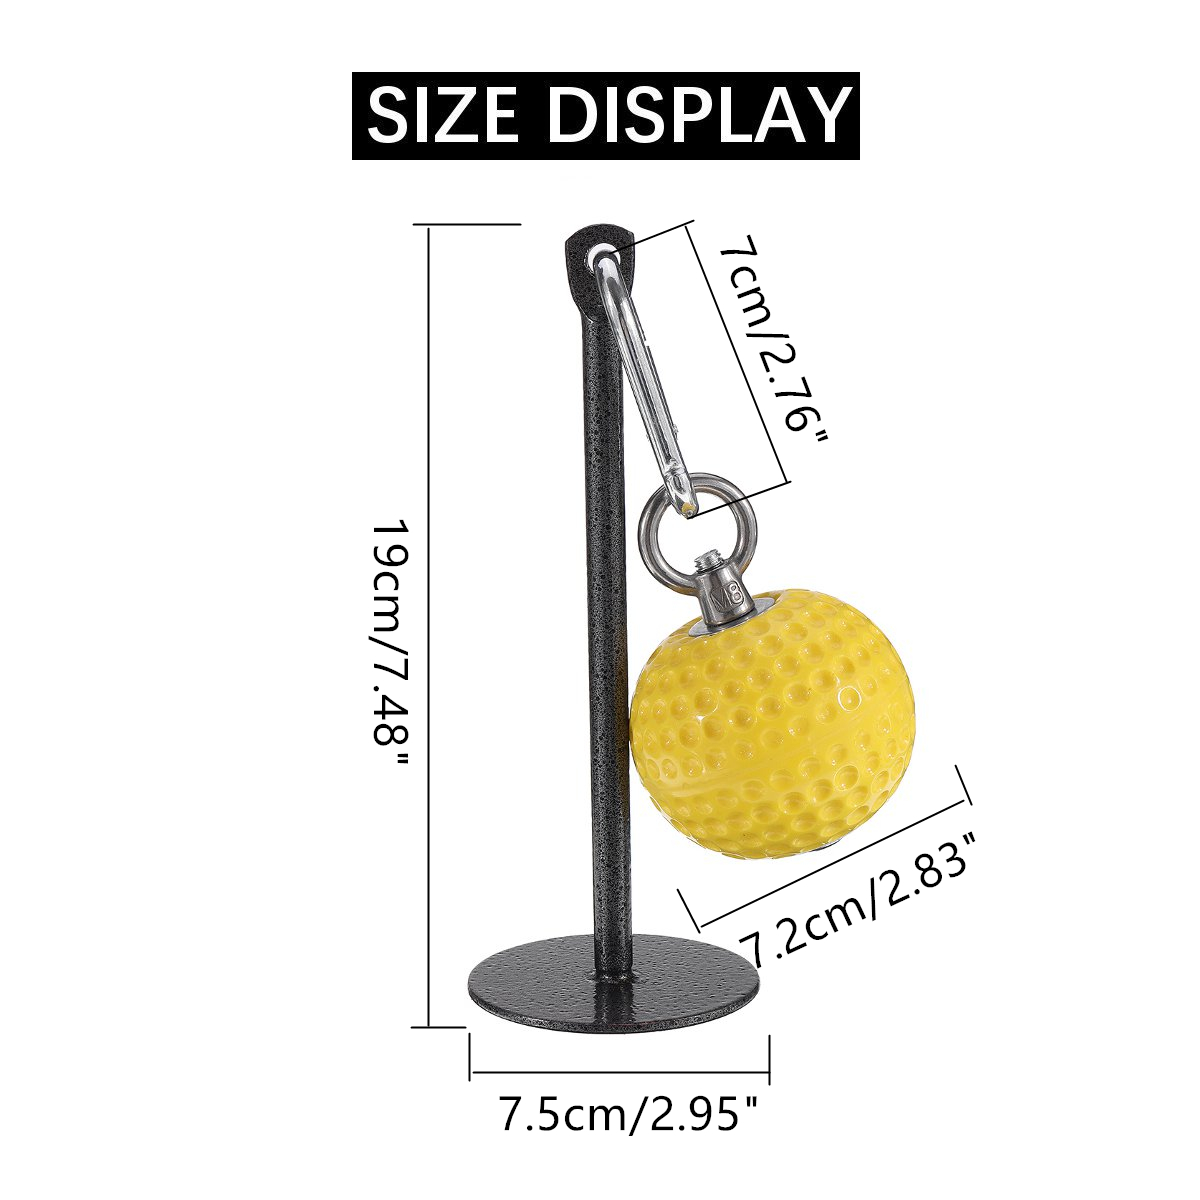 72mm-Ball-Iron-Sheet-Holder-Barbell-Disk-Rack-Loading-Pin-Weight-Lifting-Bracket-Home-Fitness-Gym-Ex-1686768-4